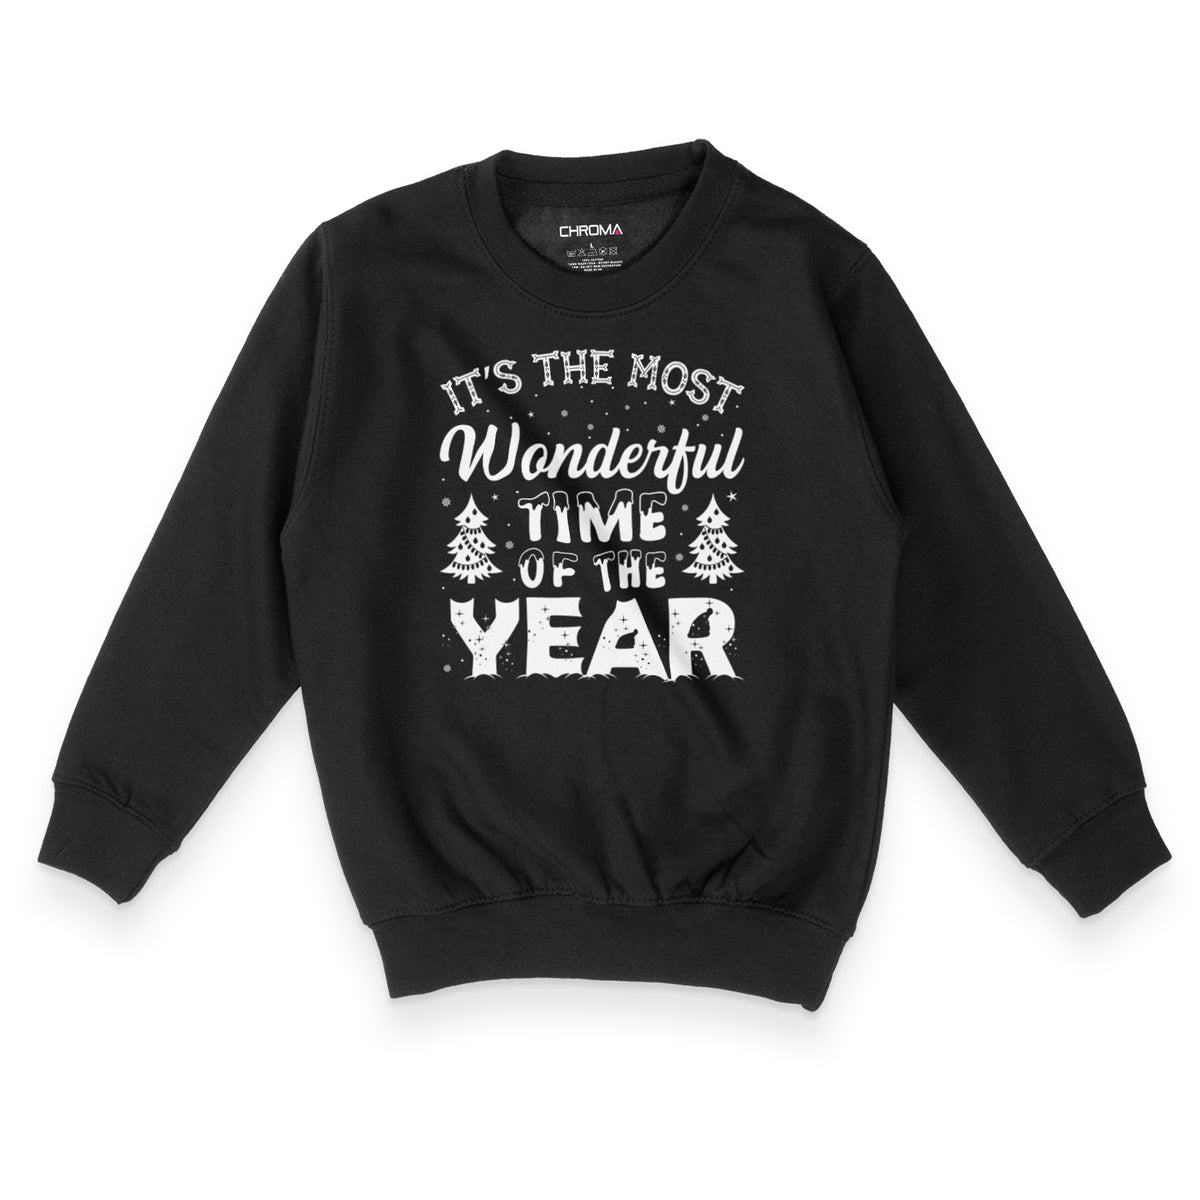 The Most Wonderful Time Of The Year | Kid's Christmas Sweatshirt Chroma Clothing